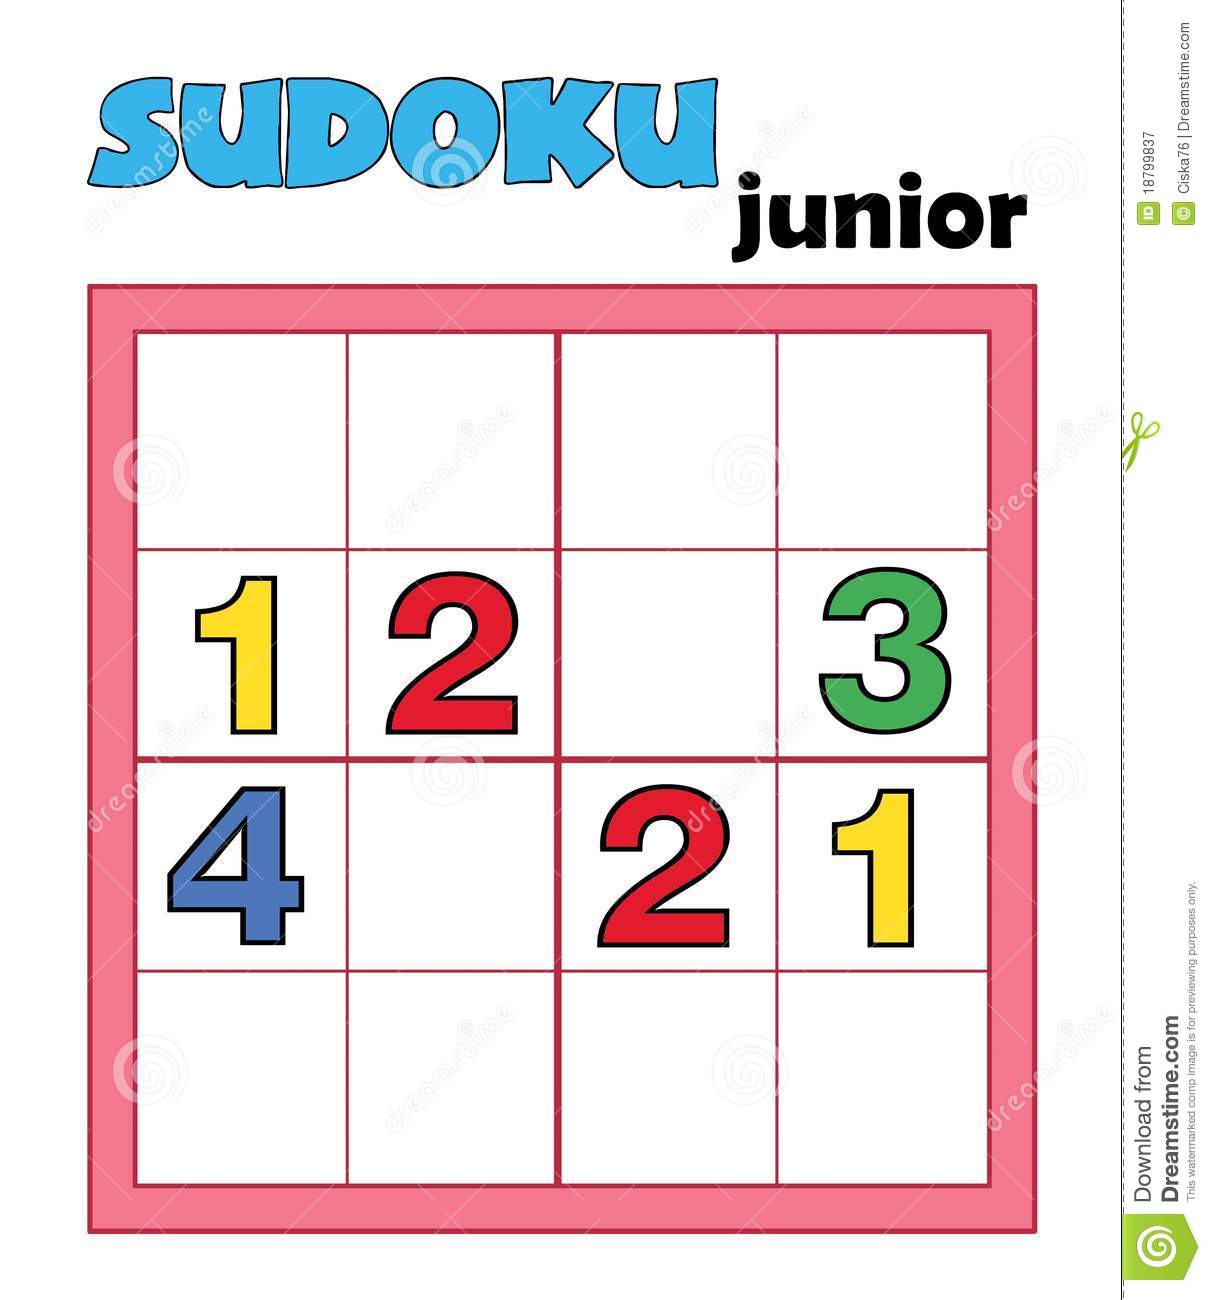 Digital Illustration Of Sudoku For Children  You Put The 4 Elements In